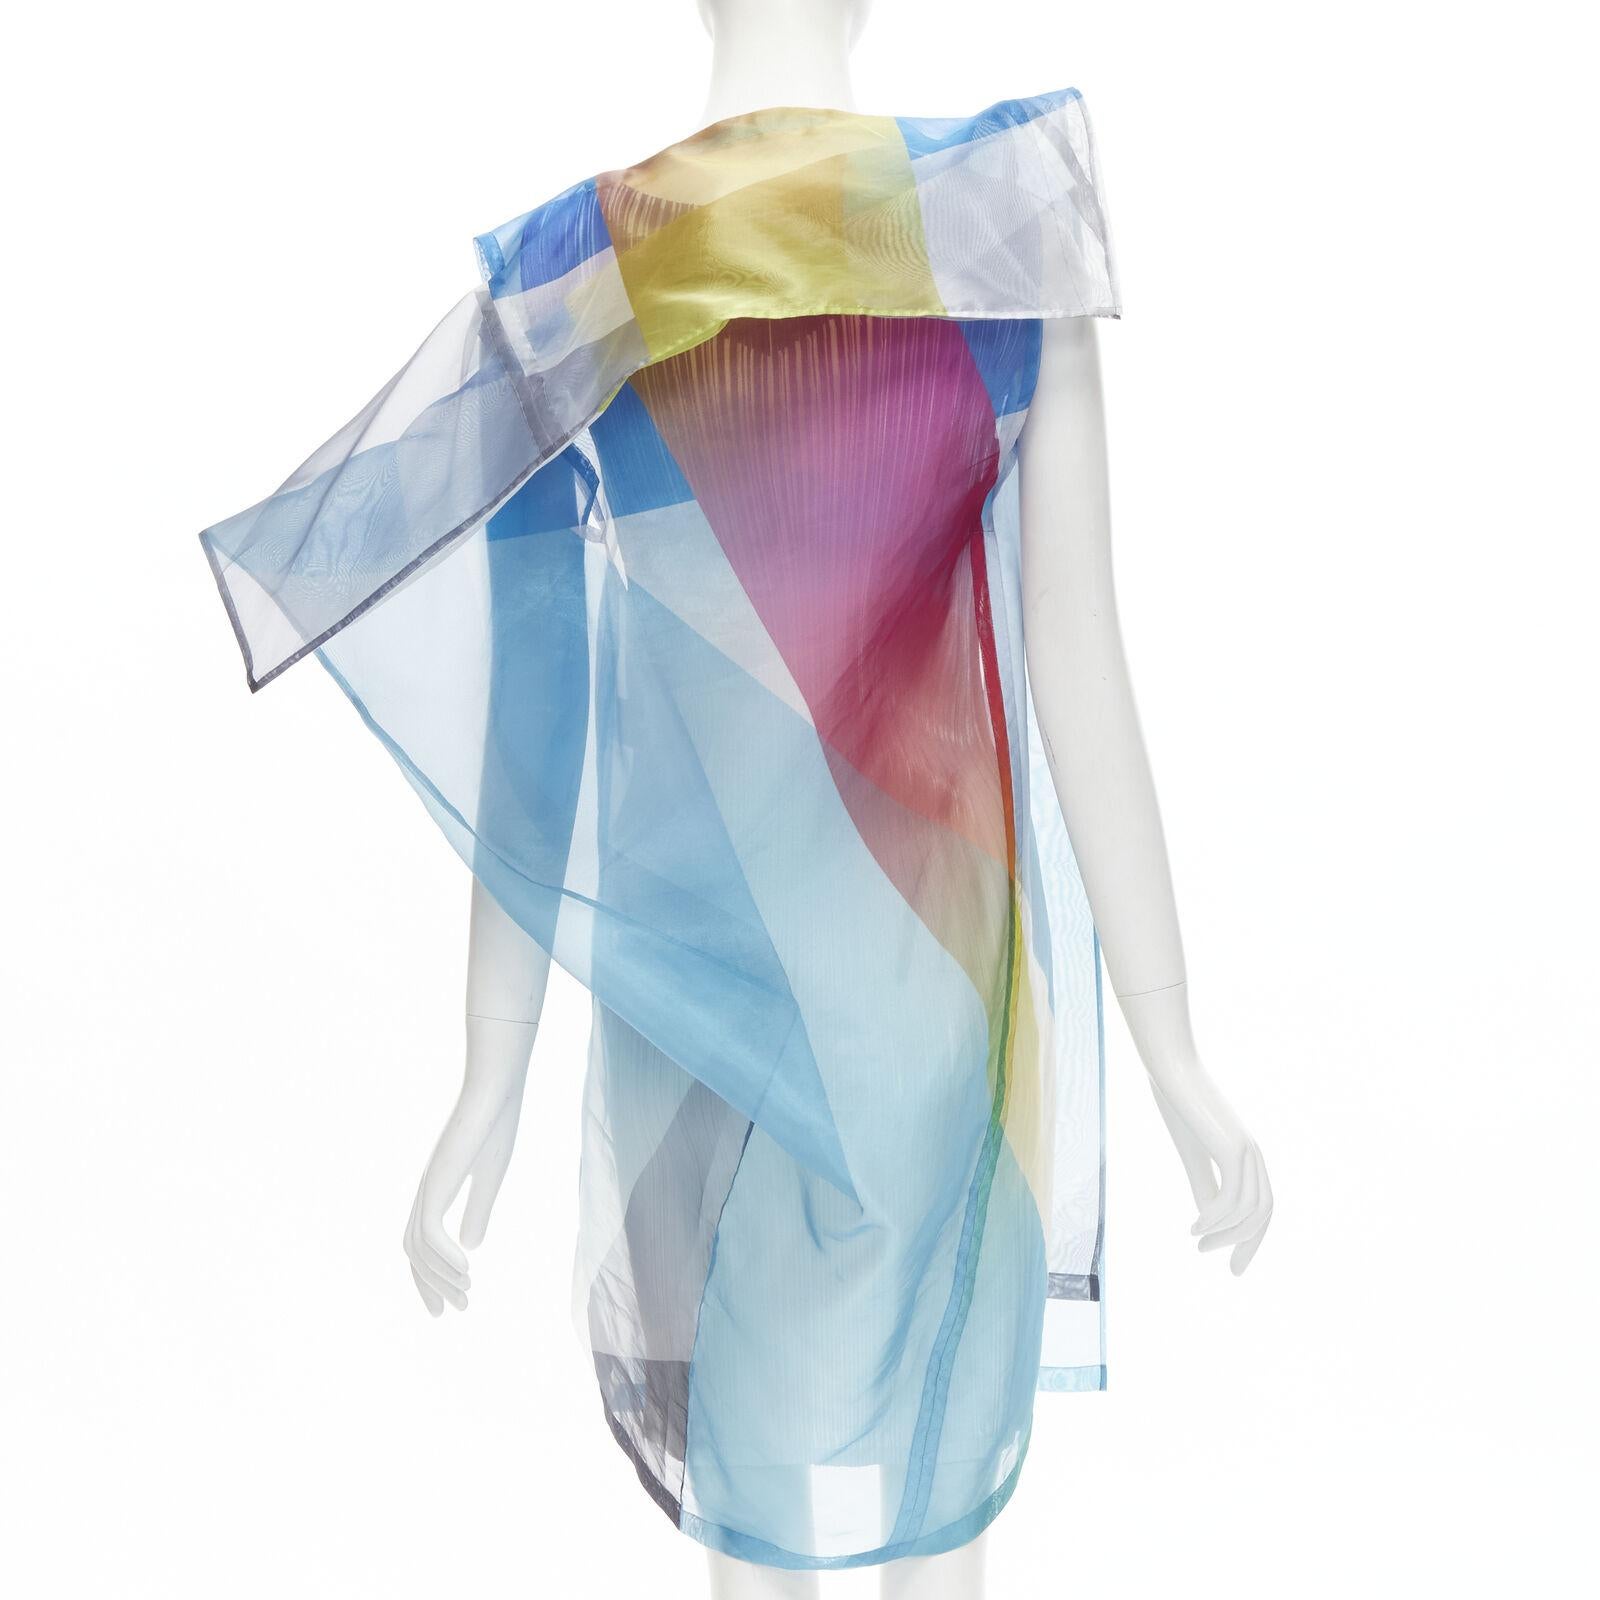 ISSEY MIYAKE pleated slip dress sheer polyester rainbow cape layered dress JP2 M
Reference: TGAS/C01494
Brand: Issey Miyake
Material: Polyester
Color: Multicolour
Pattern: Abstract
Lining: Polyester
Extra Details: Plisse pleated shift dress lining.